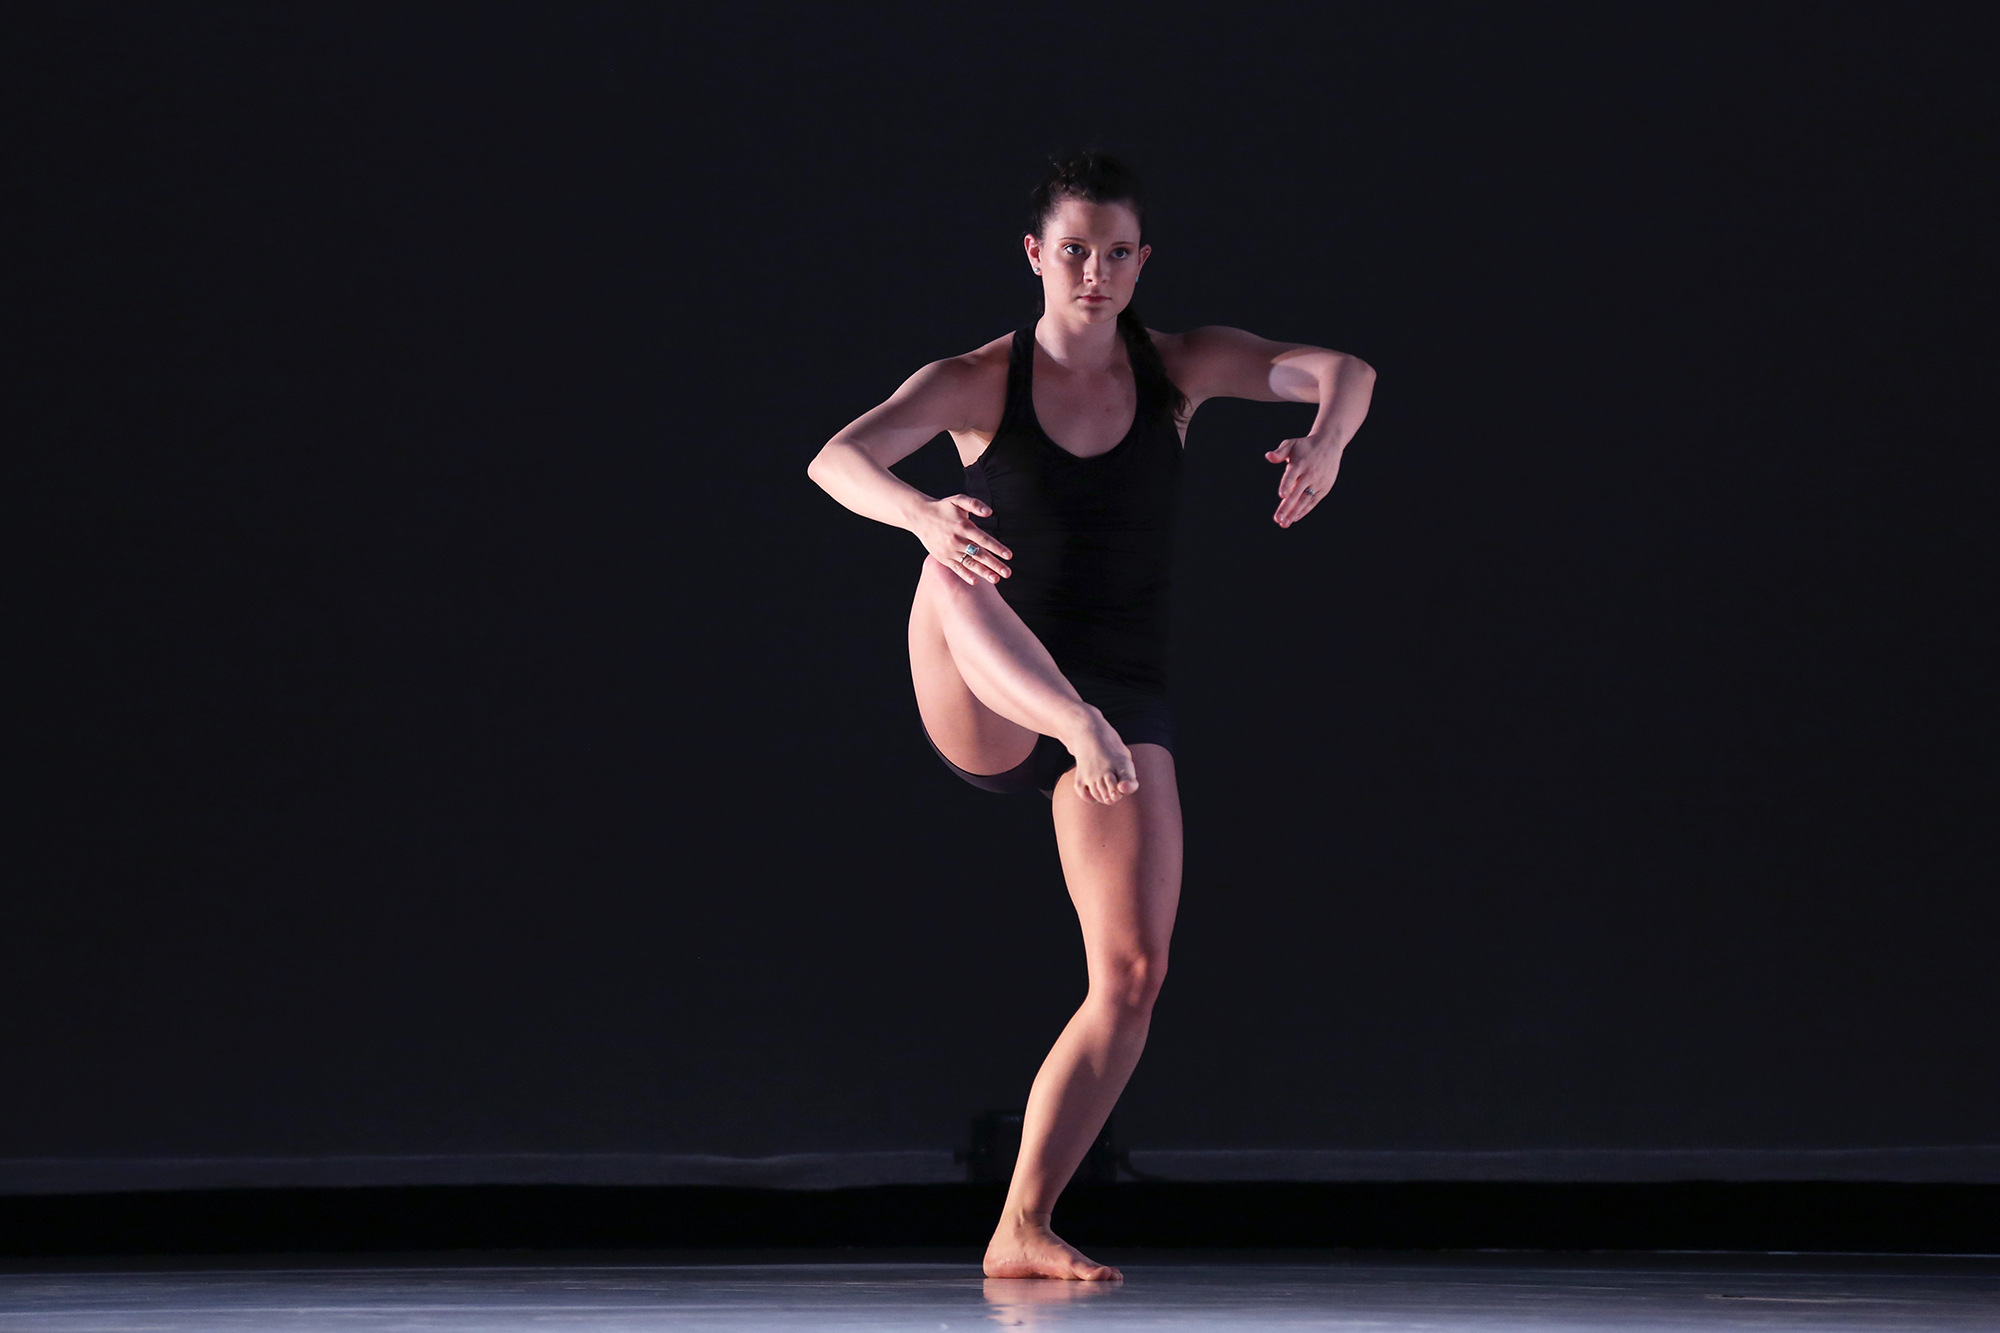 Brynne is dancing with her right leg lifted and bent, and her arms in front of her. She is wearing a black leotard and standing in front of a black backdrop. 